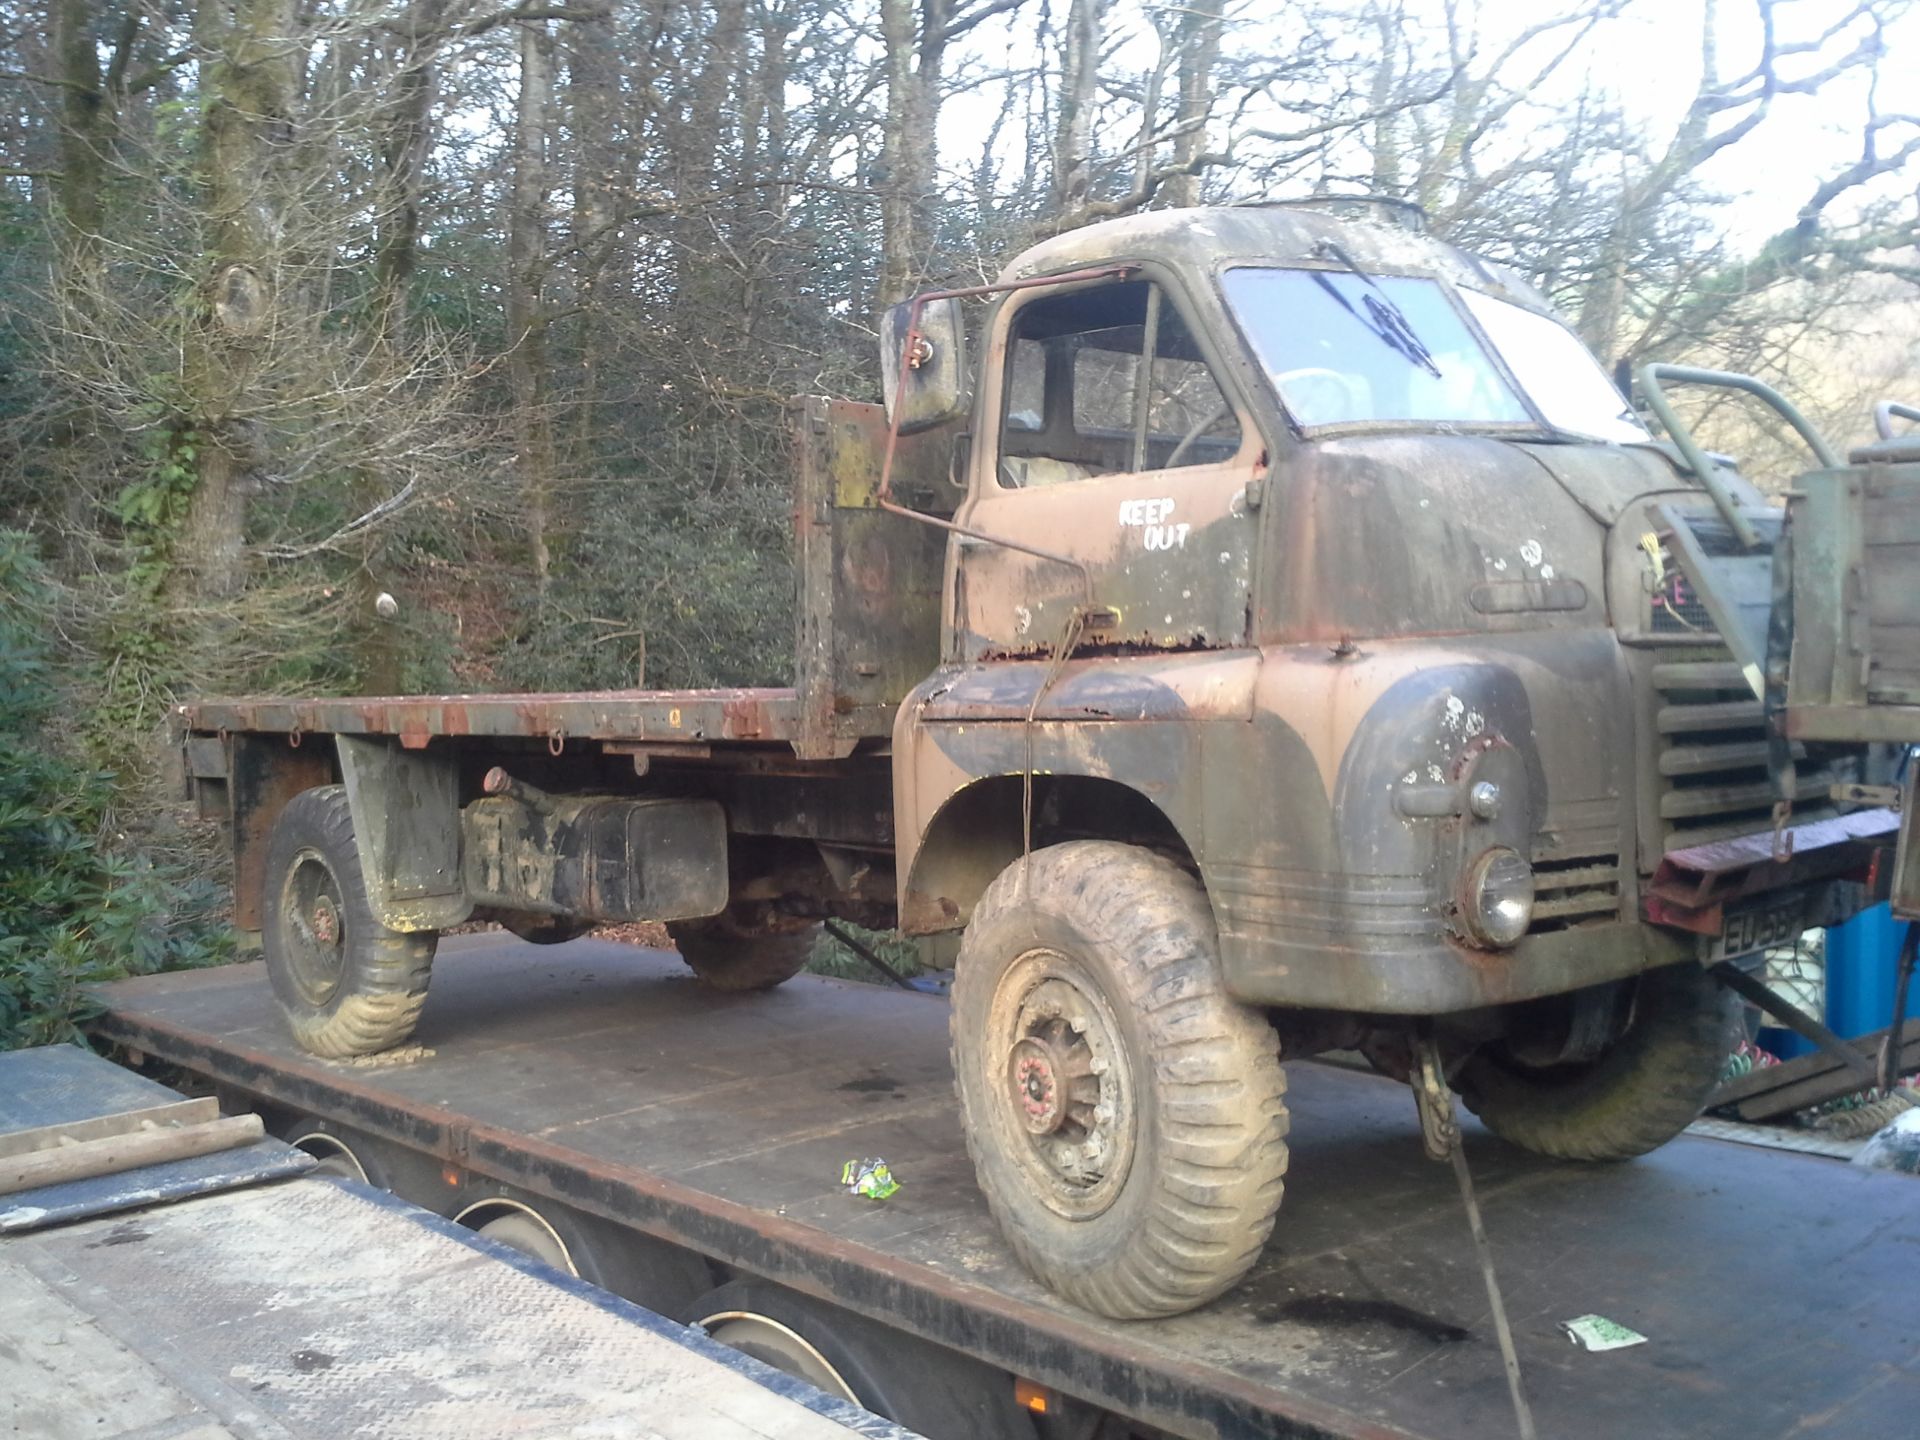 Bedford Type RL 4wd 3 ton flat bed ex military truck Reg. no PEU 58F Offered for sale with V5 and